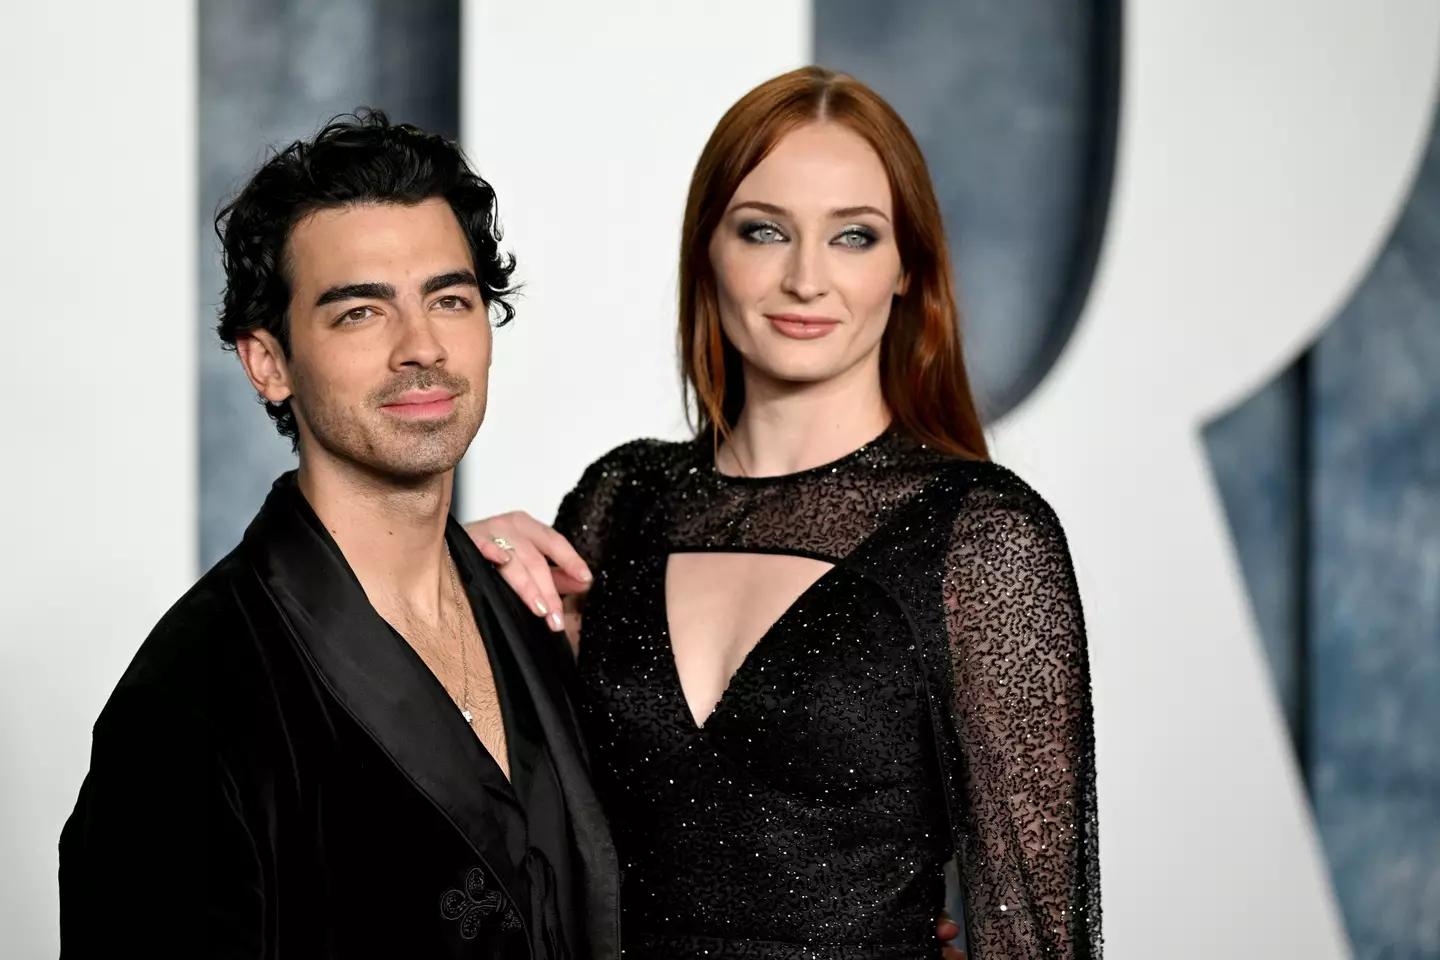 Sophie Turner allegedly only found out about the divorce her husband was filing for through the media.